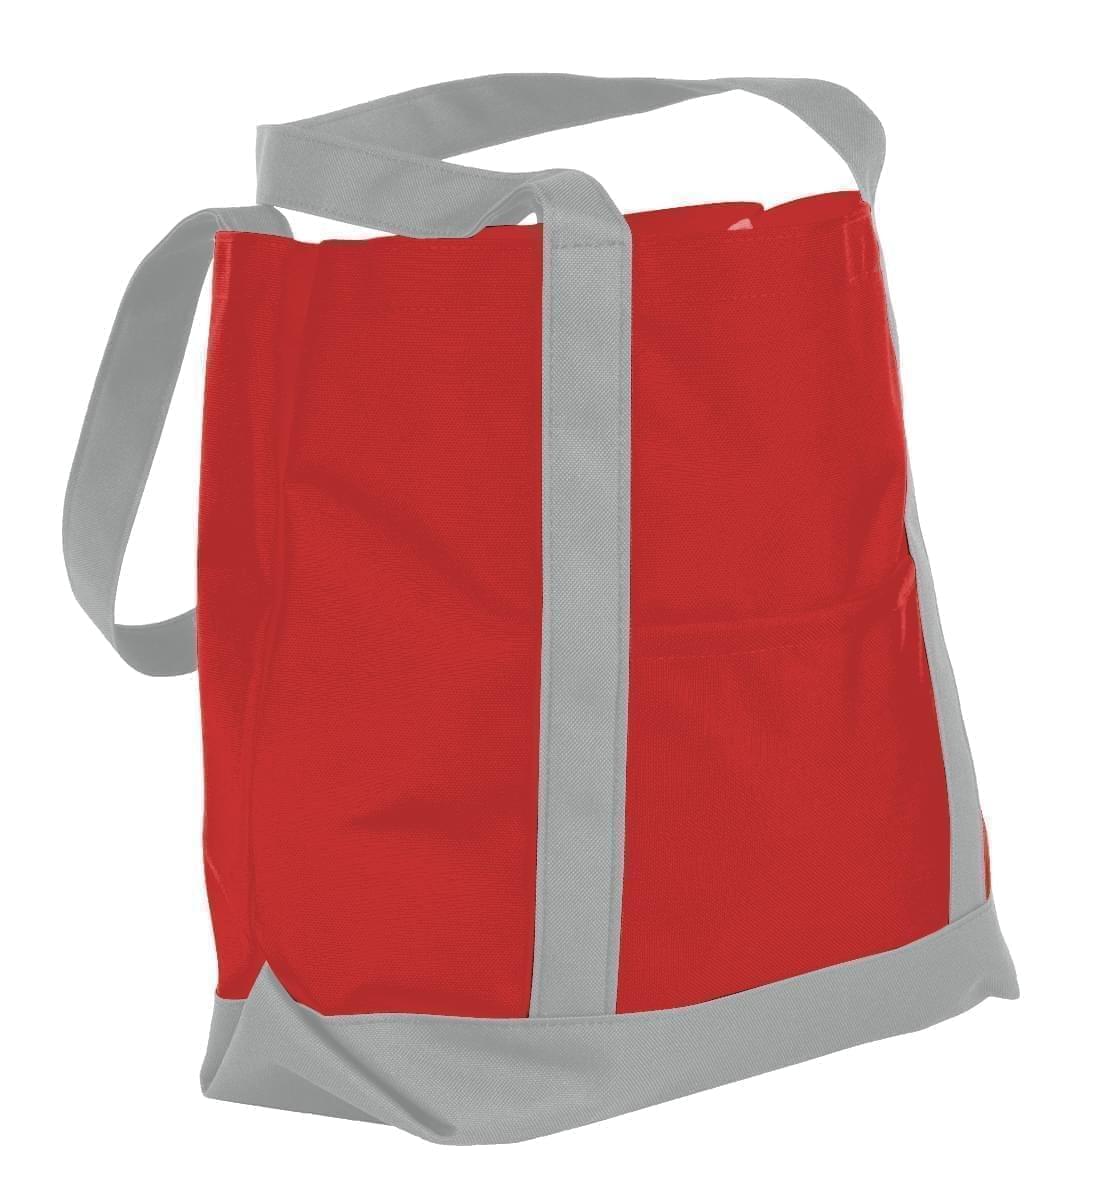 USA Made Canvas Fashion Tote Bags, Red-Grey, XAACL1UAEN